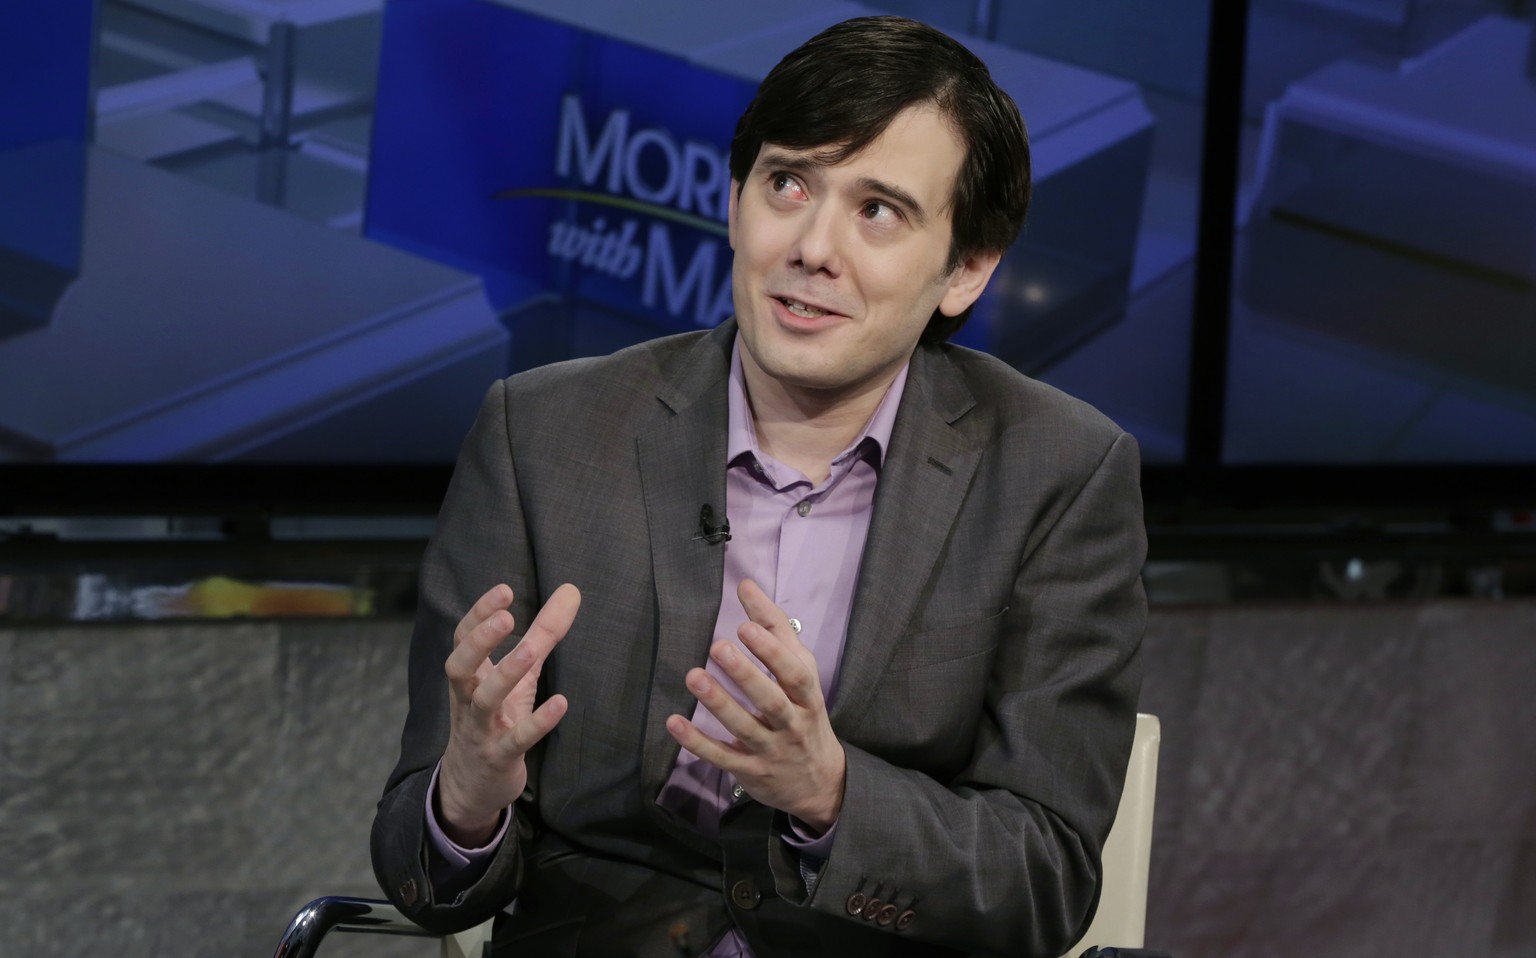 FILE - In this Aug. 15, 2017, file photo, former pharmaceutical CEO Martin Shkreli speaks during an interview by Maria Bartiromo during her &quot;Mornings with Maria Bartiromo&quot; program on the Fox ...